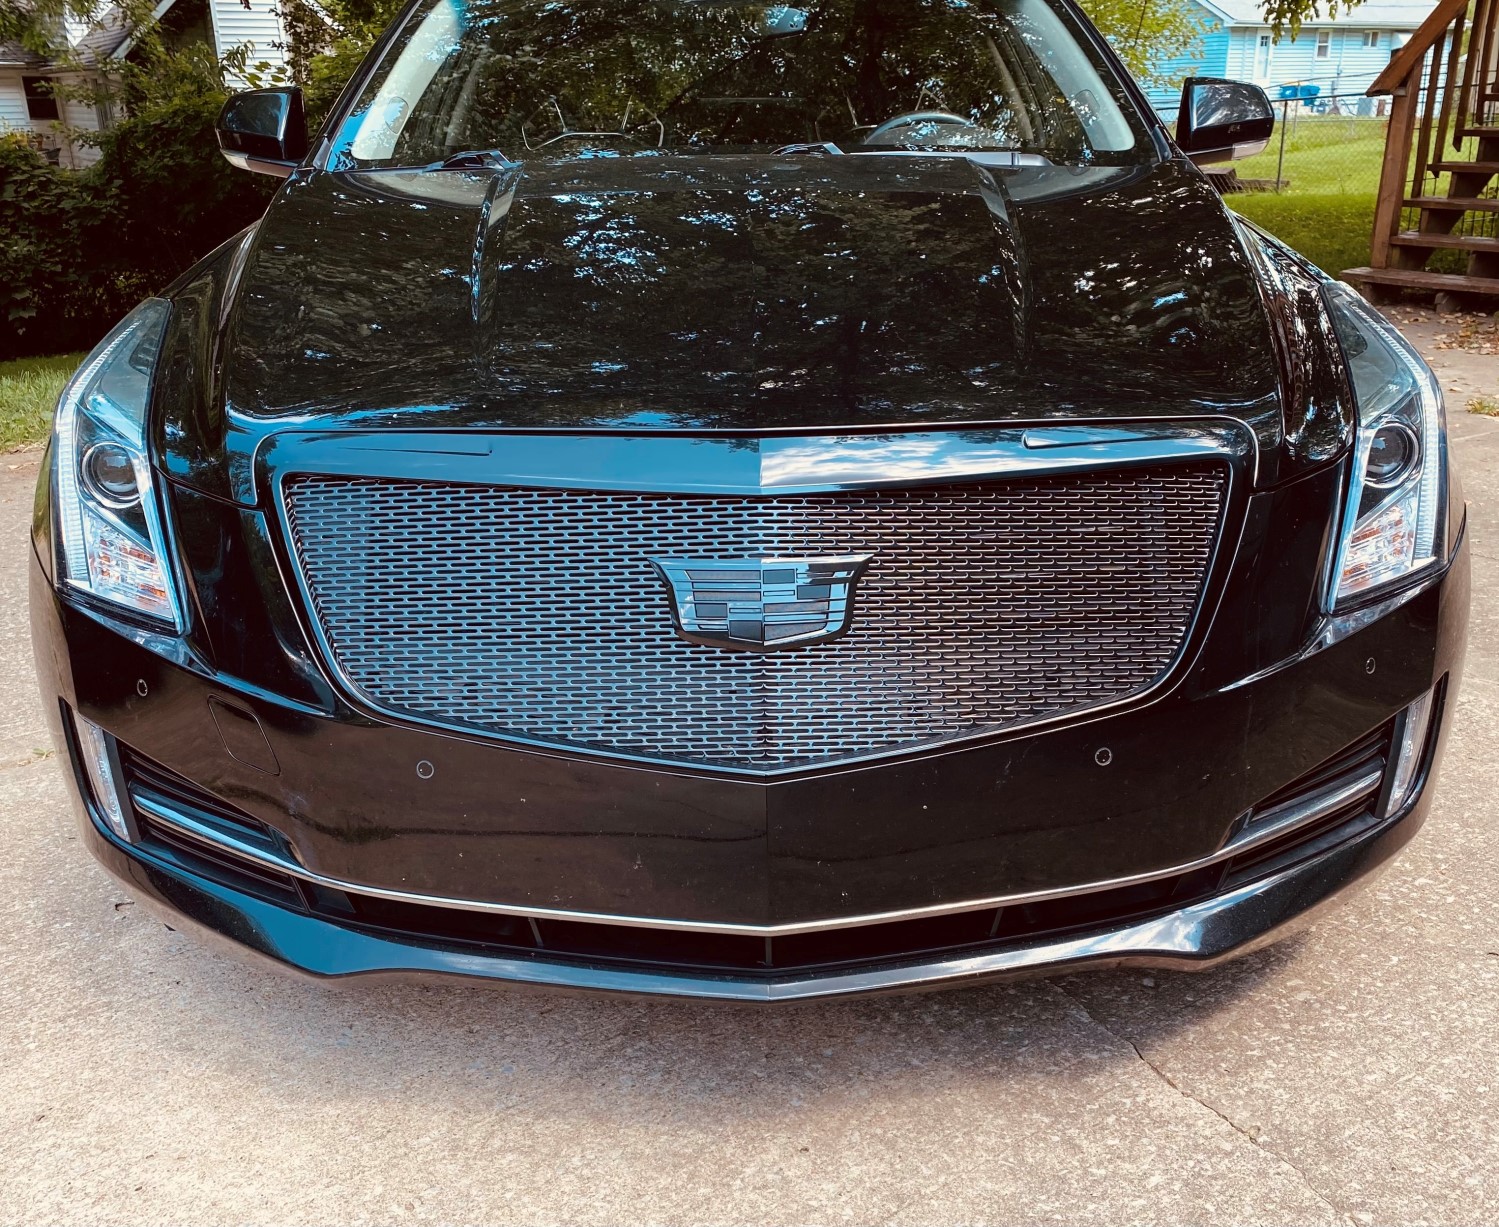 Sleek and Stylish: Our New Black Mesh Grille and Emblem for Your 2015+ Cadillac ATS